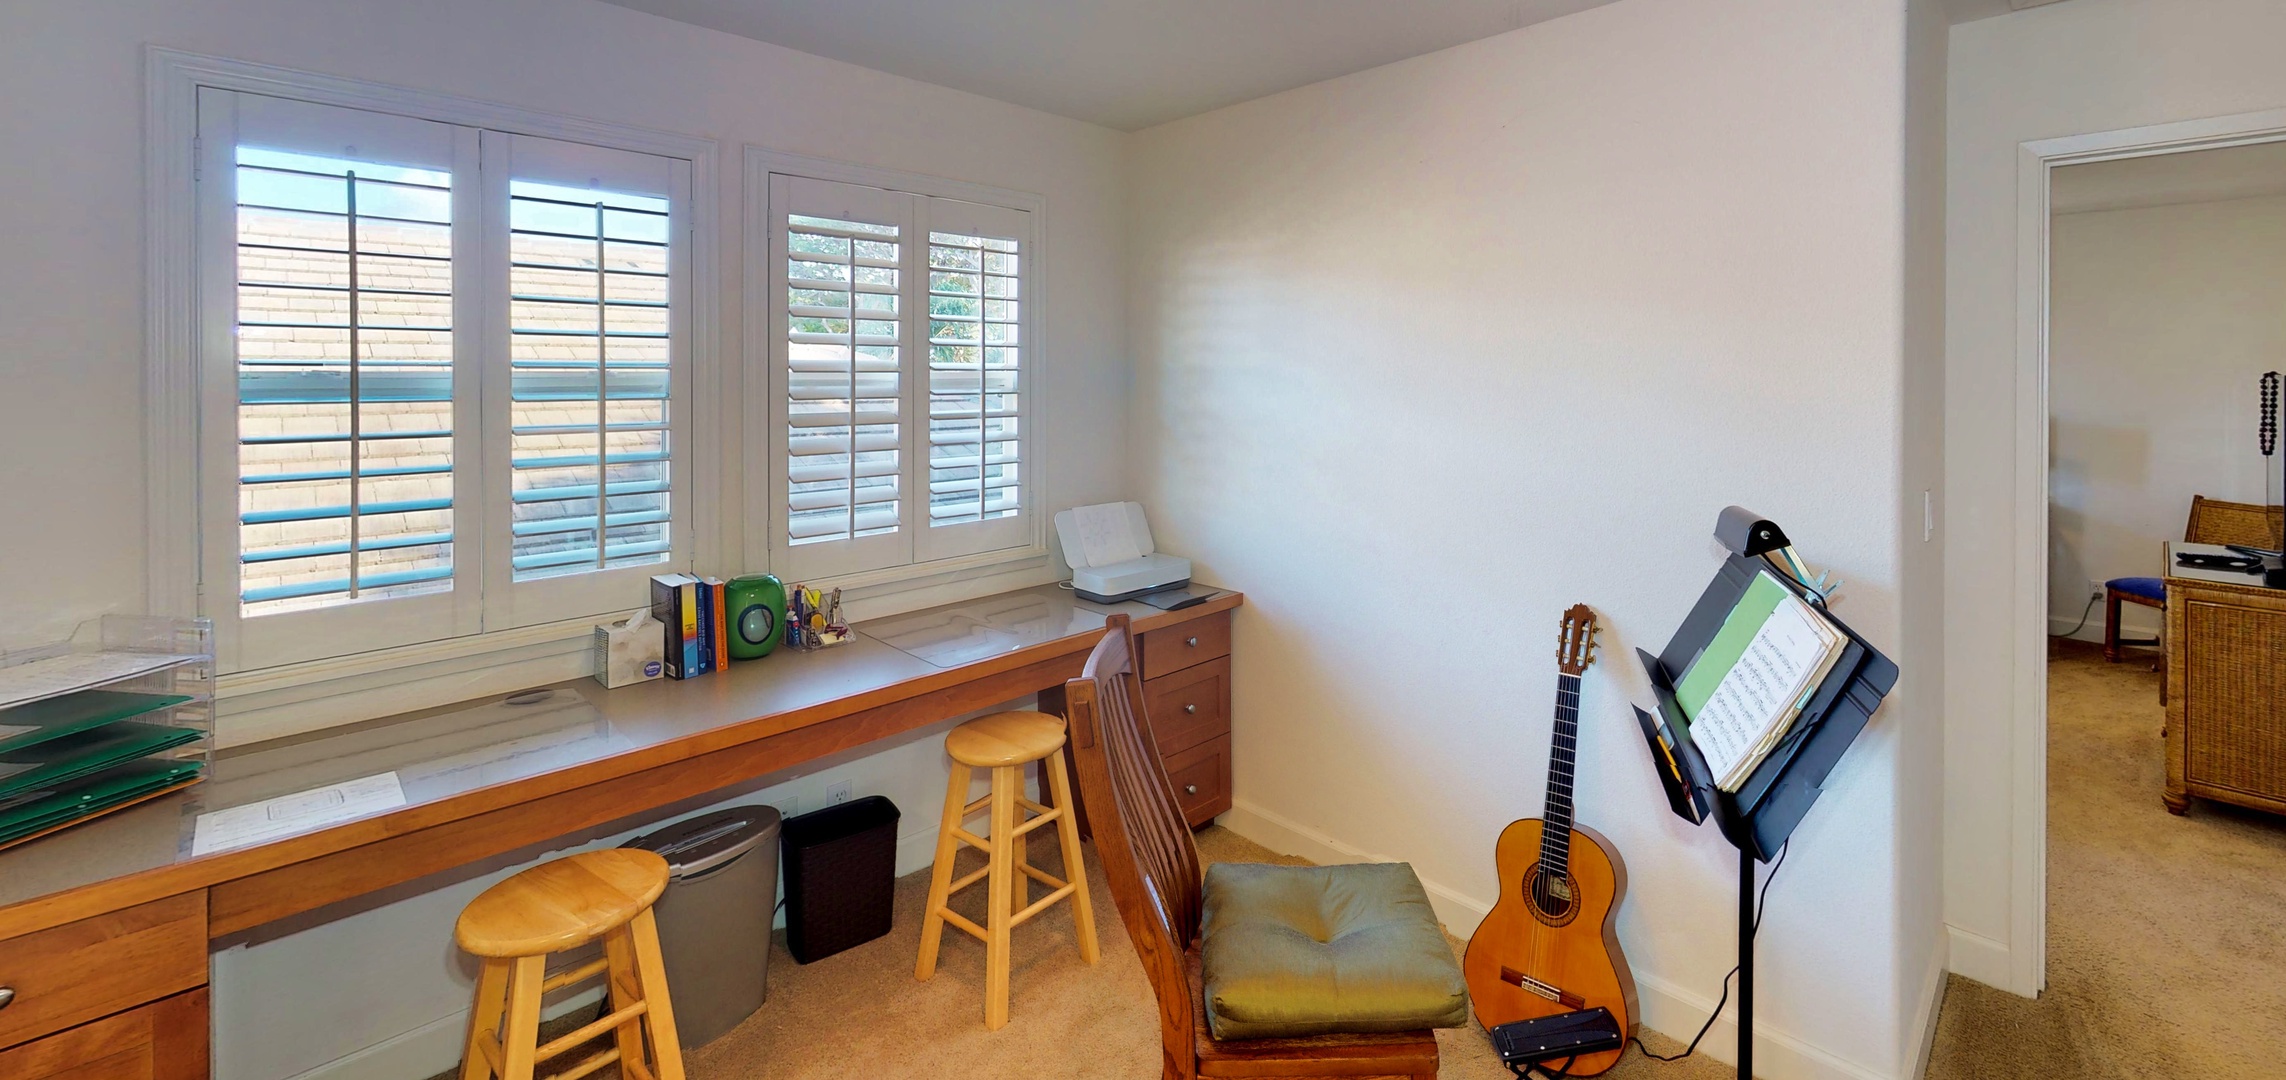 Kapolei Vacation Rentals, Ko Olina Kai Estate #17 - Loft area at top of the stairs, the perfect spot for family time.